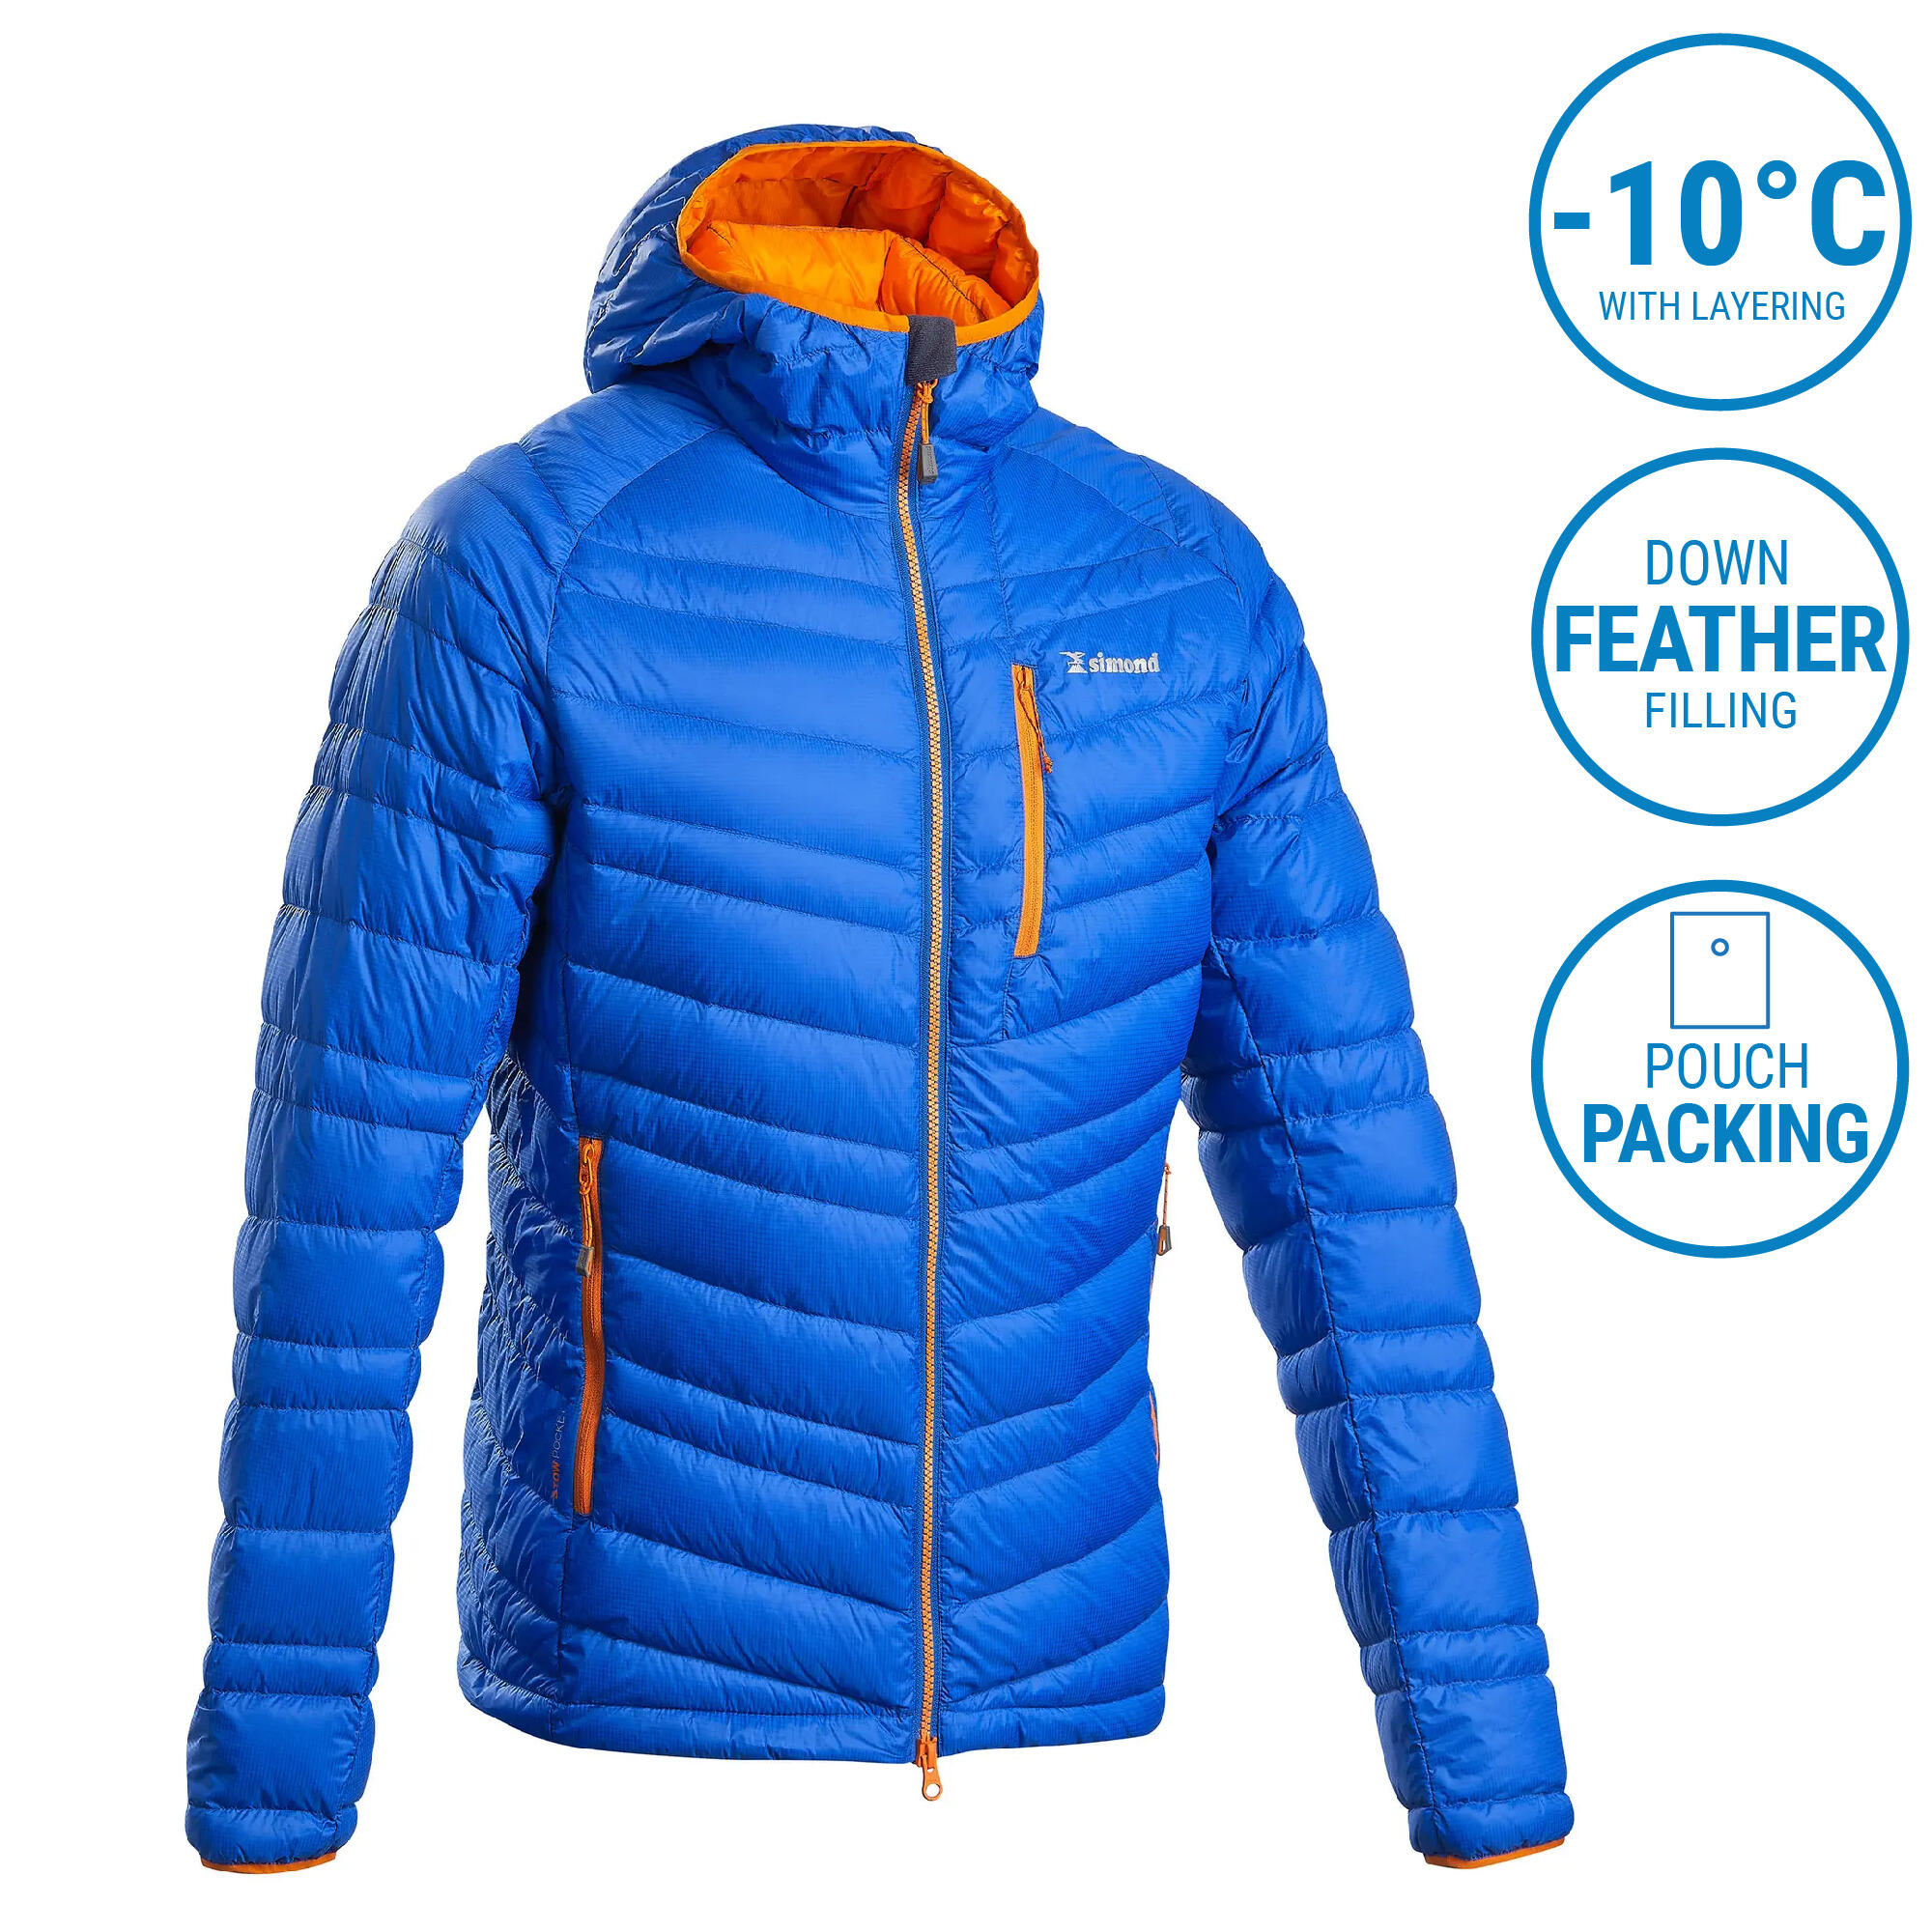 Decathlon Down Jacket - Possibly the BEST Value Currently Available -  YouTube